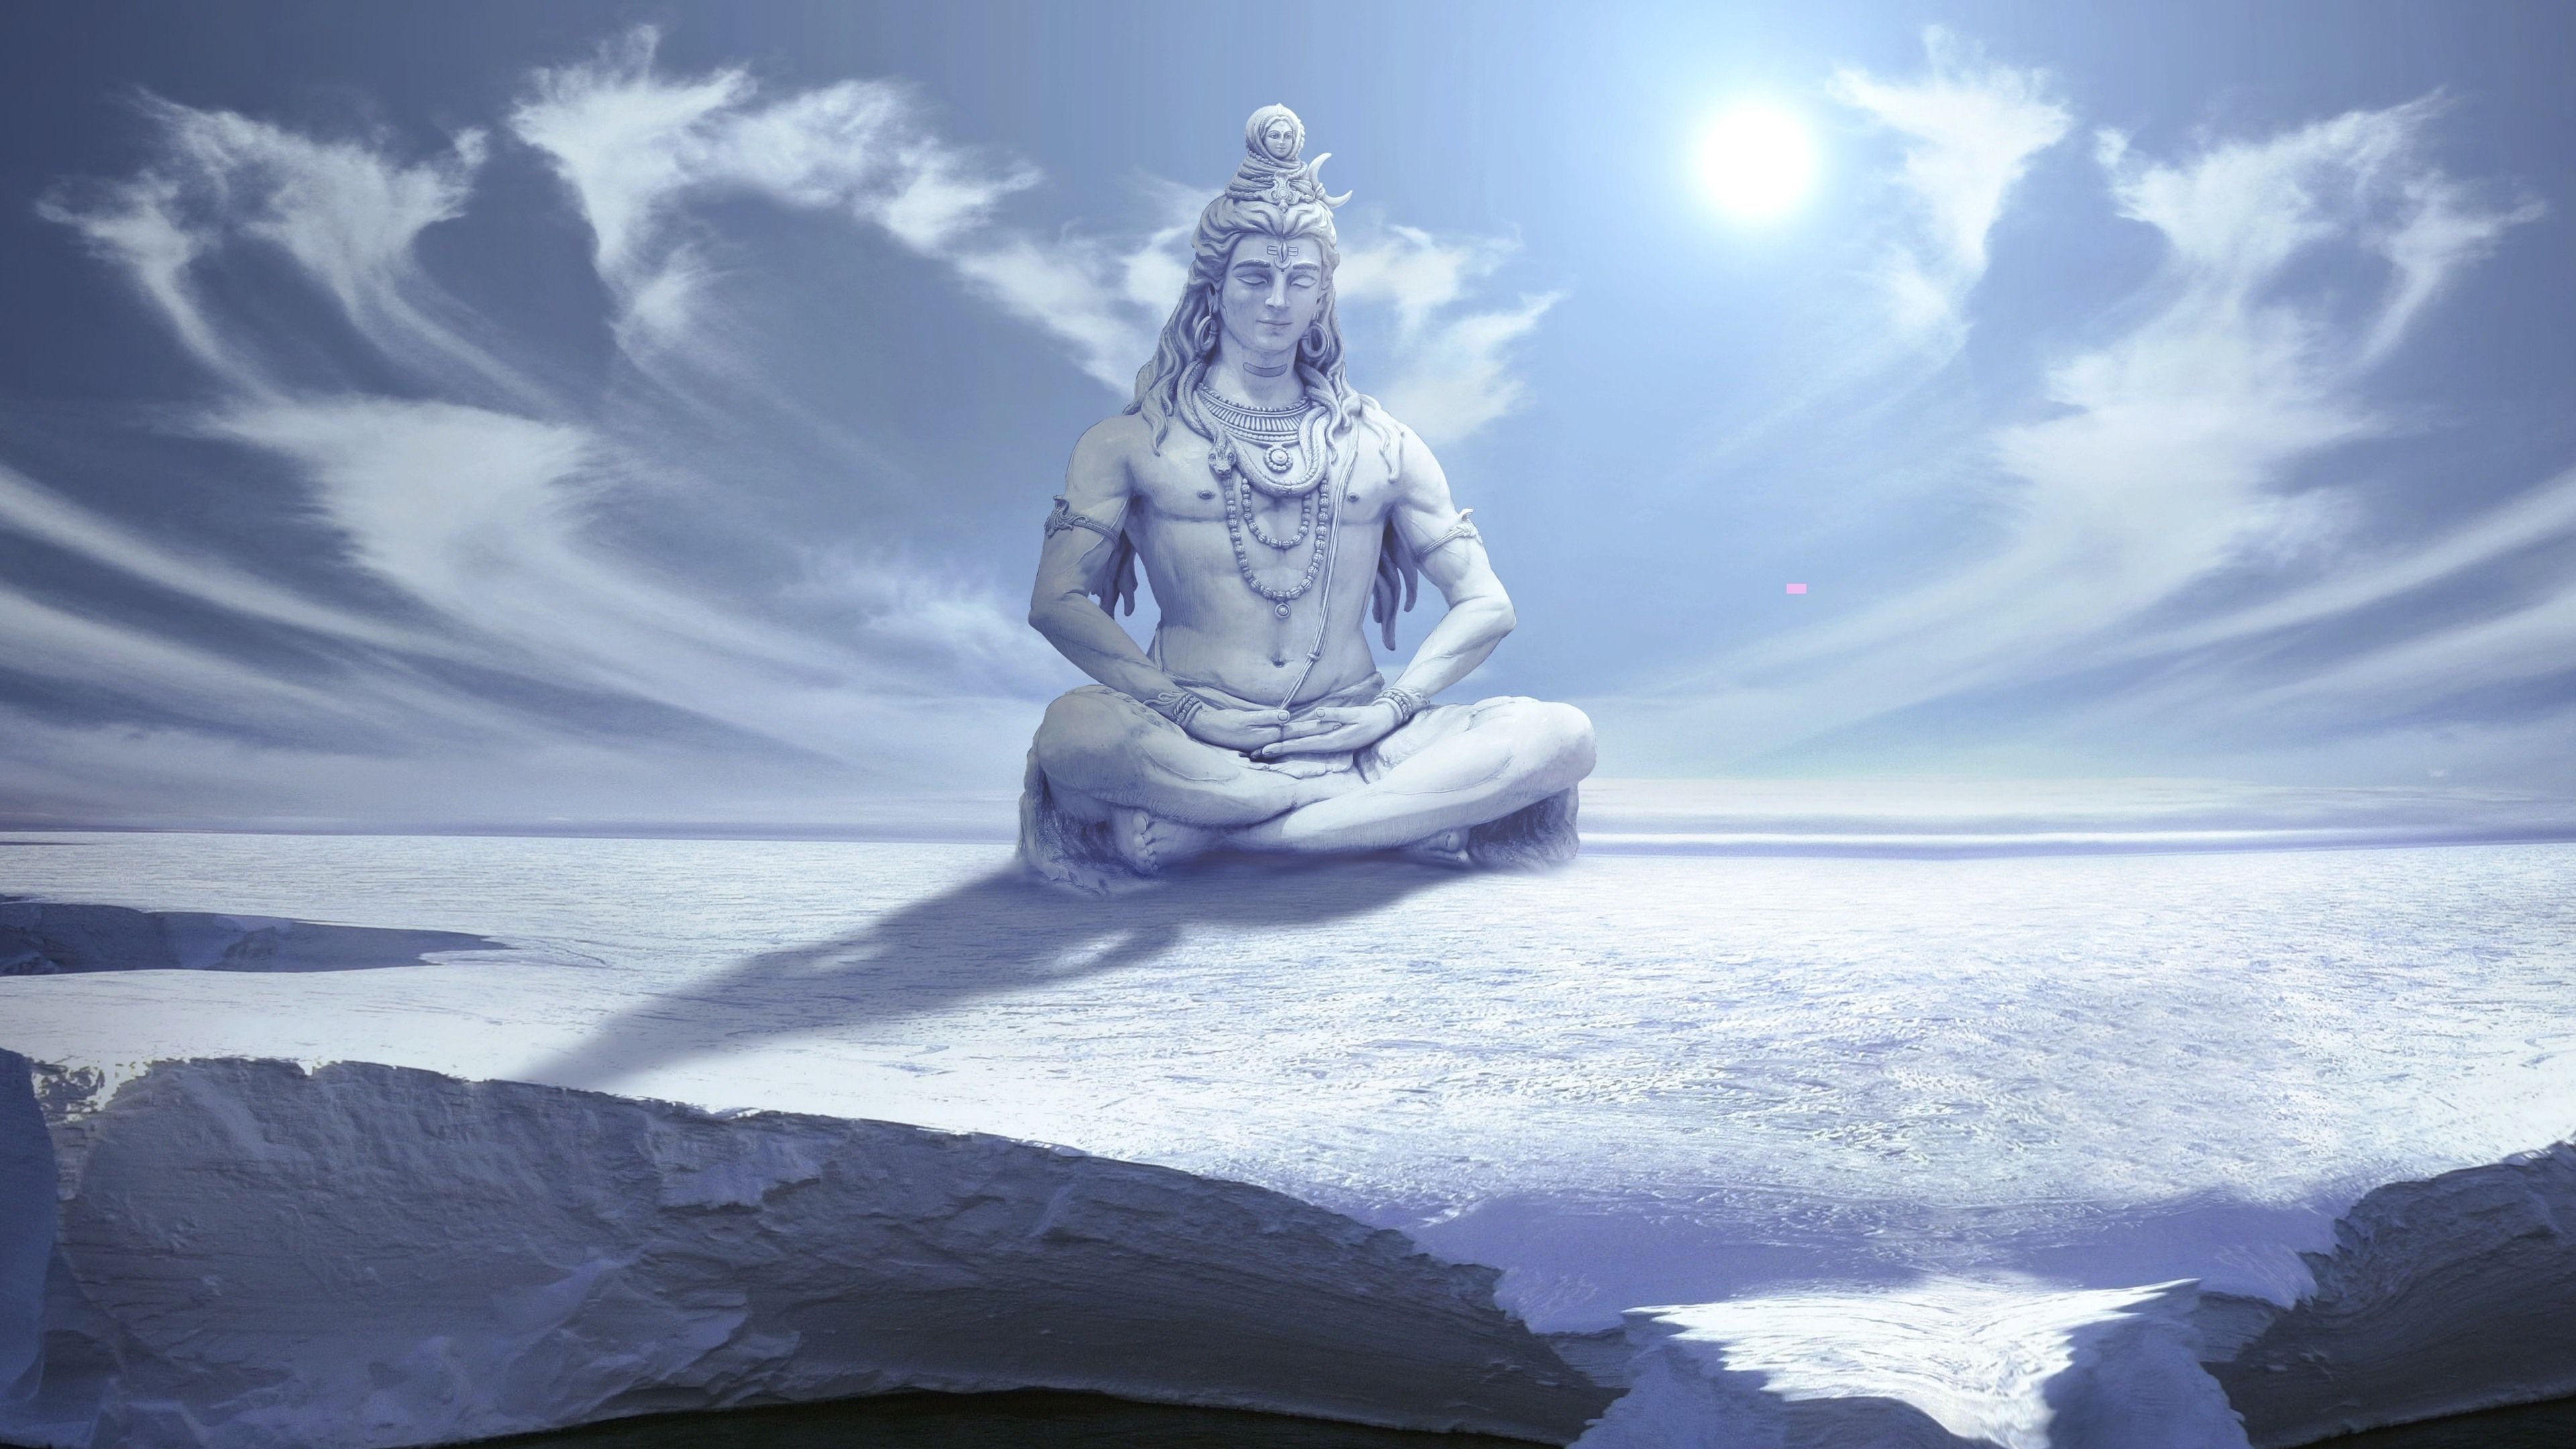 Lord Shiva 4k Wallpaper For Pc | Webphotos.org